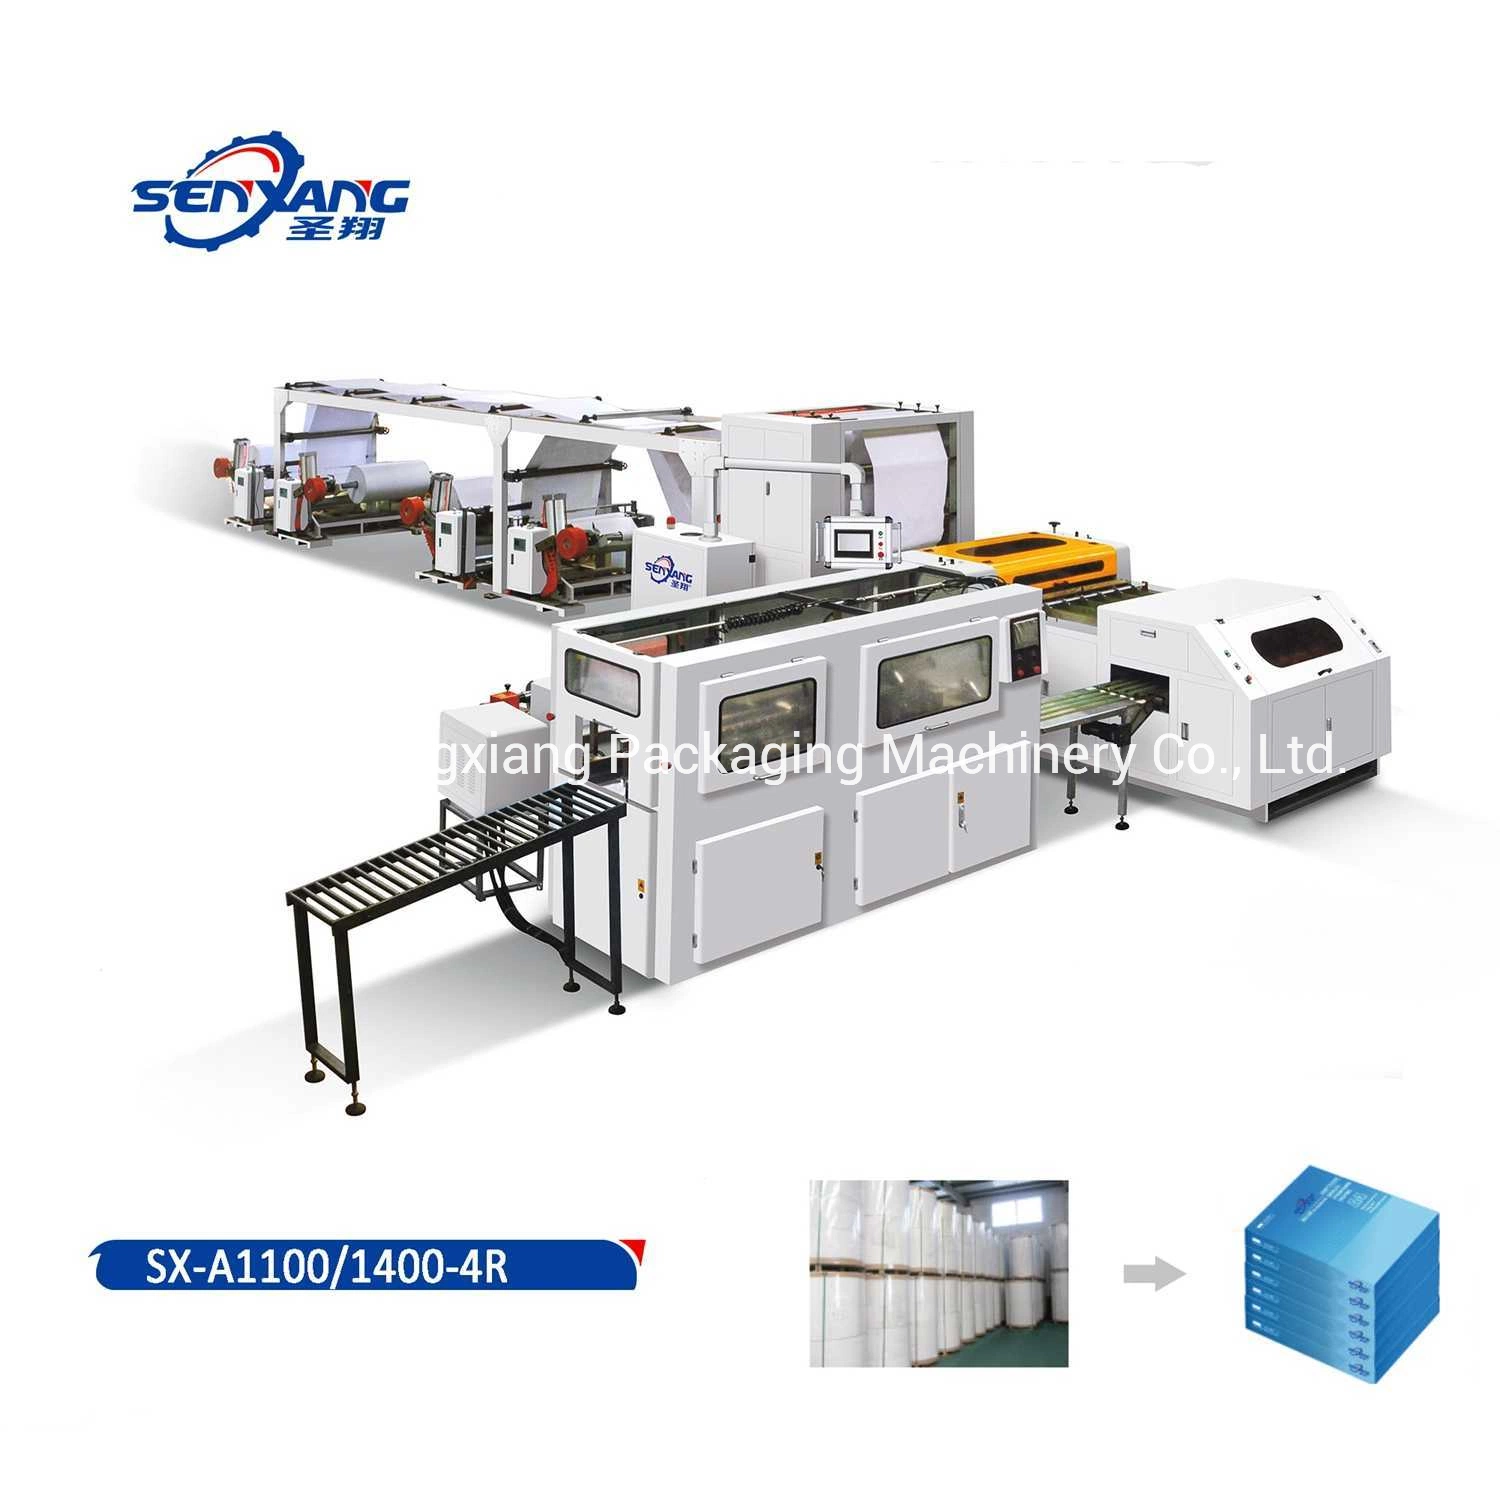 Full Automatic A4 Paper Cutting and Packing Machine Production Line